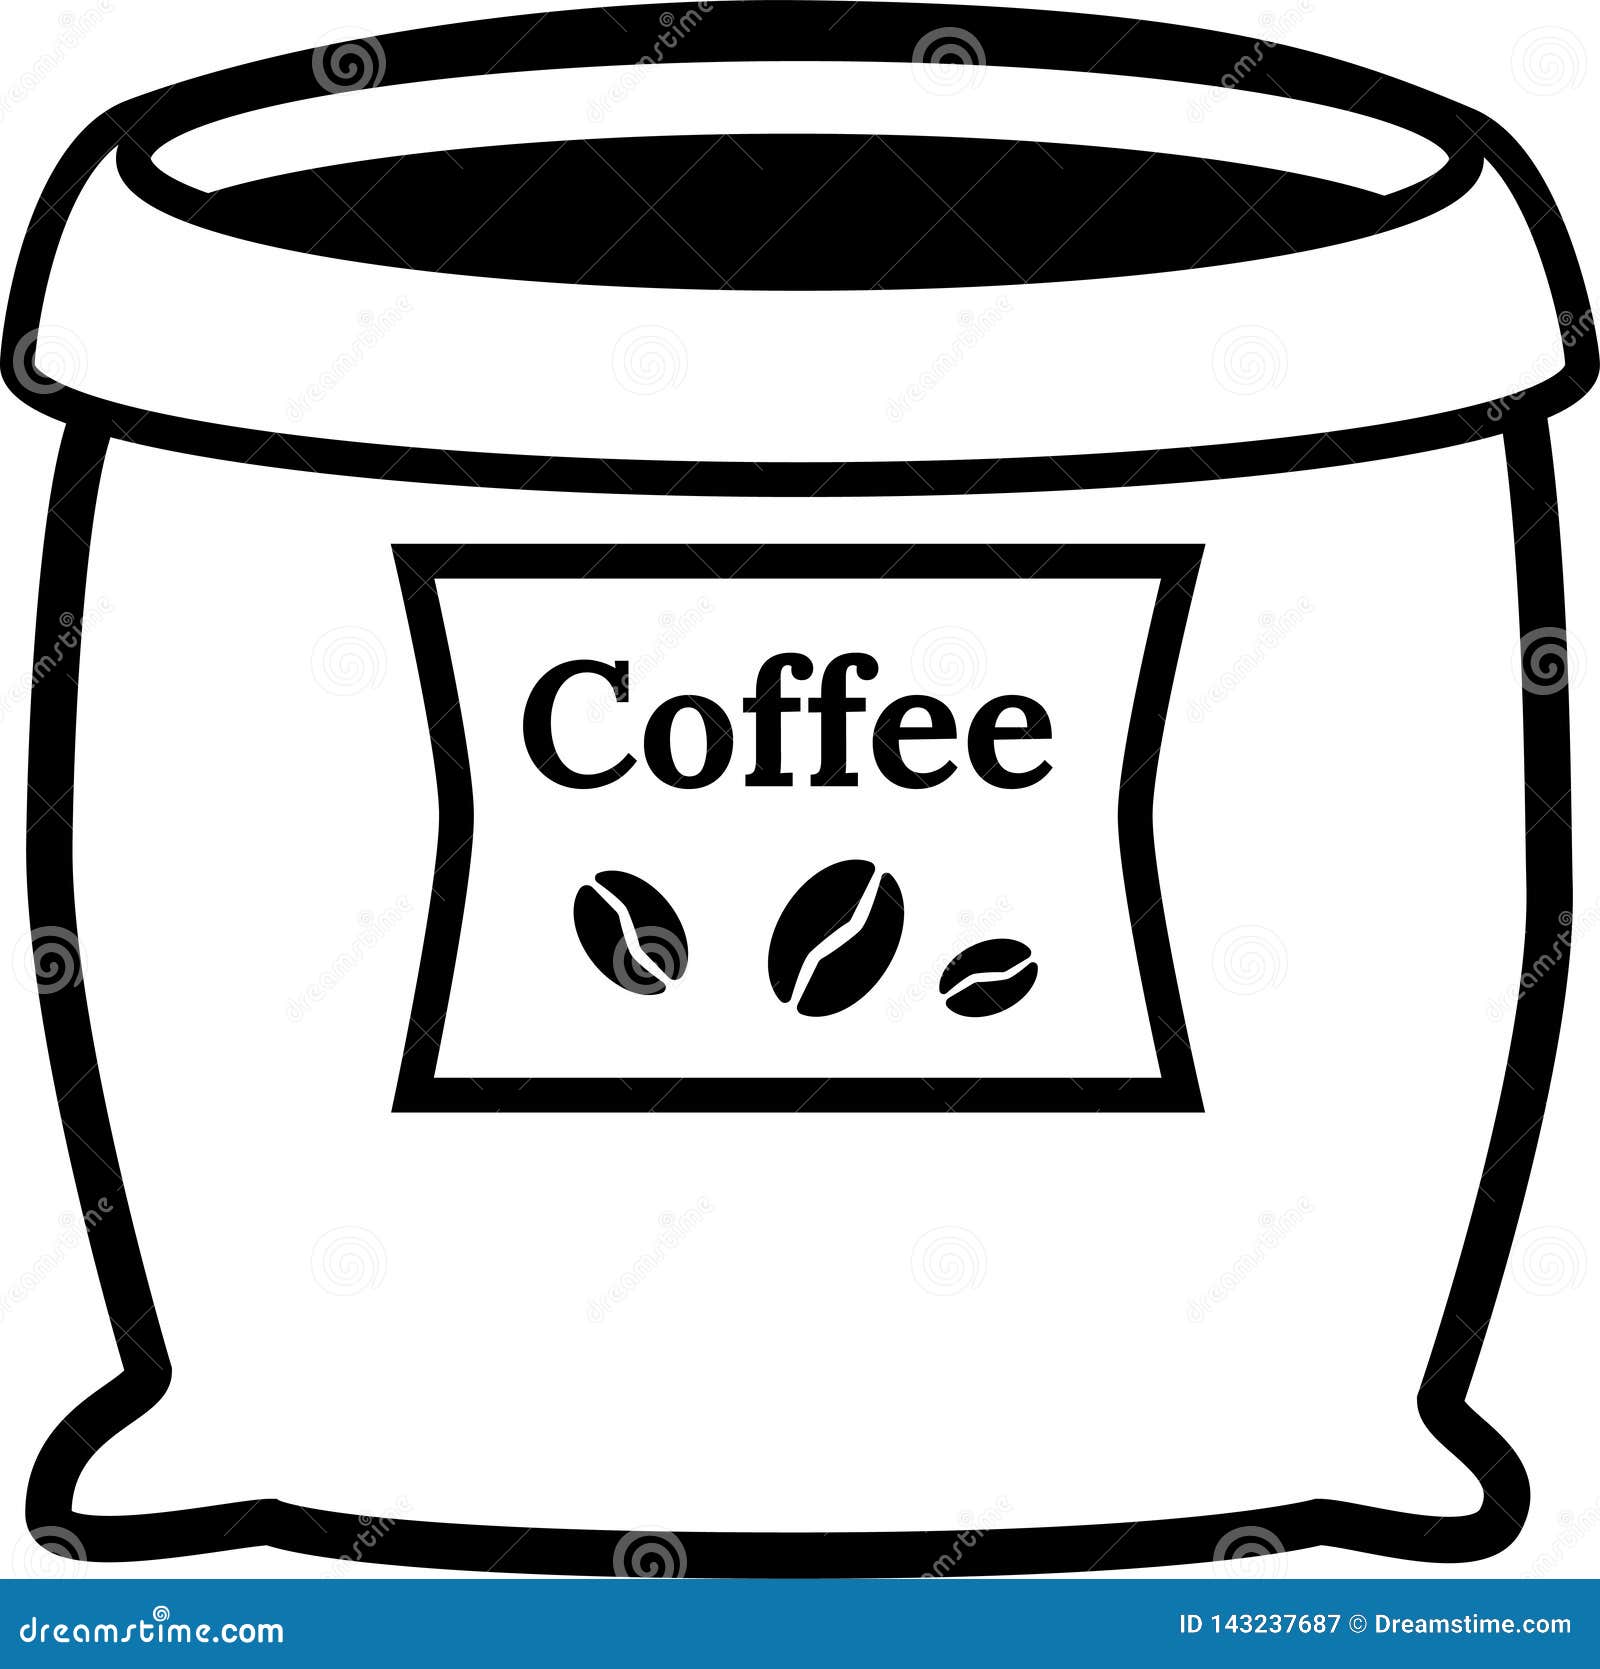 Open coffee bag with label stock vector. Illustration of